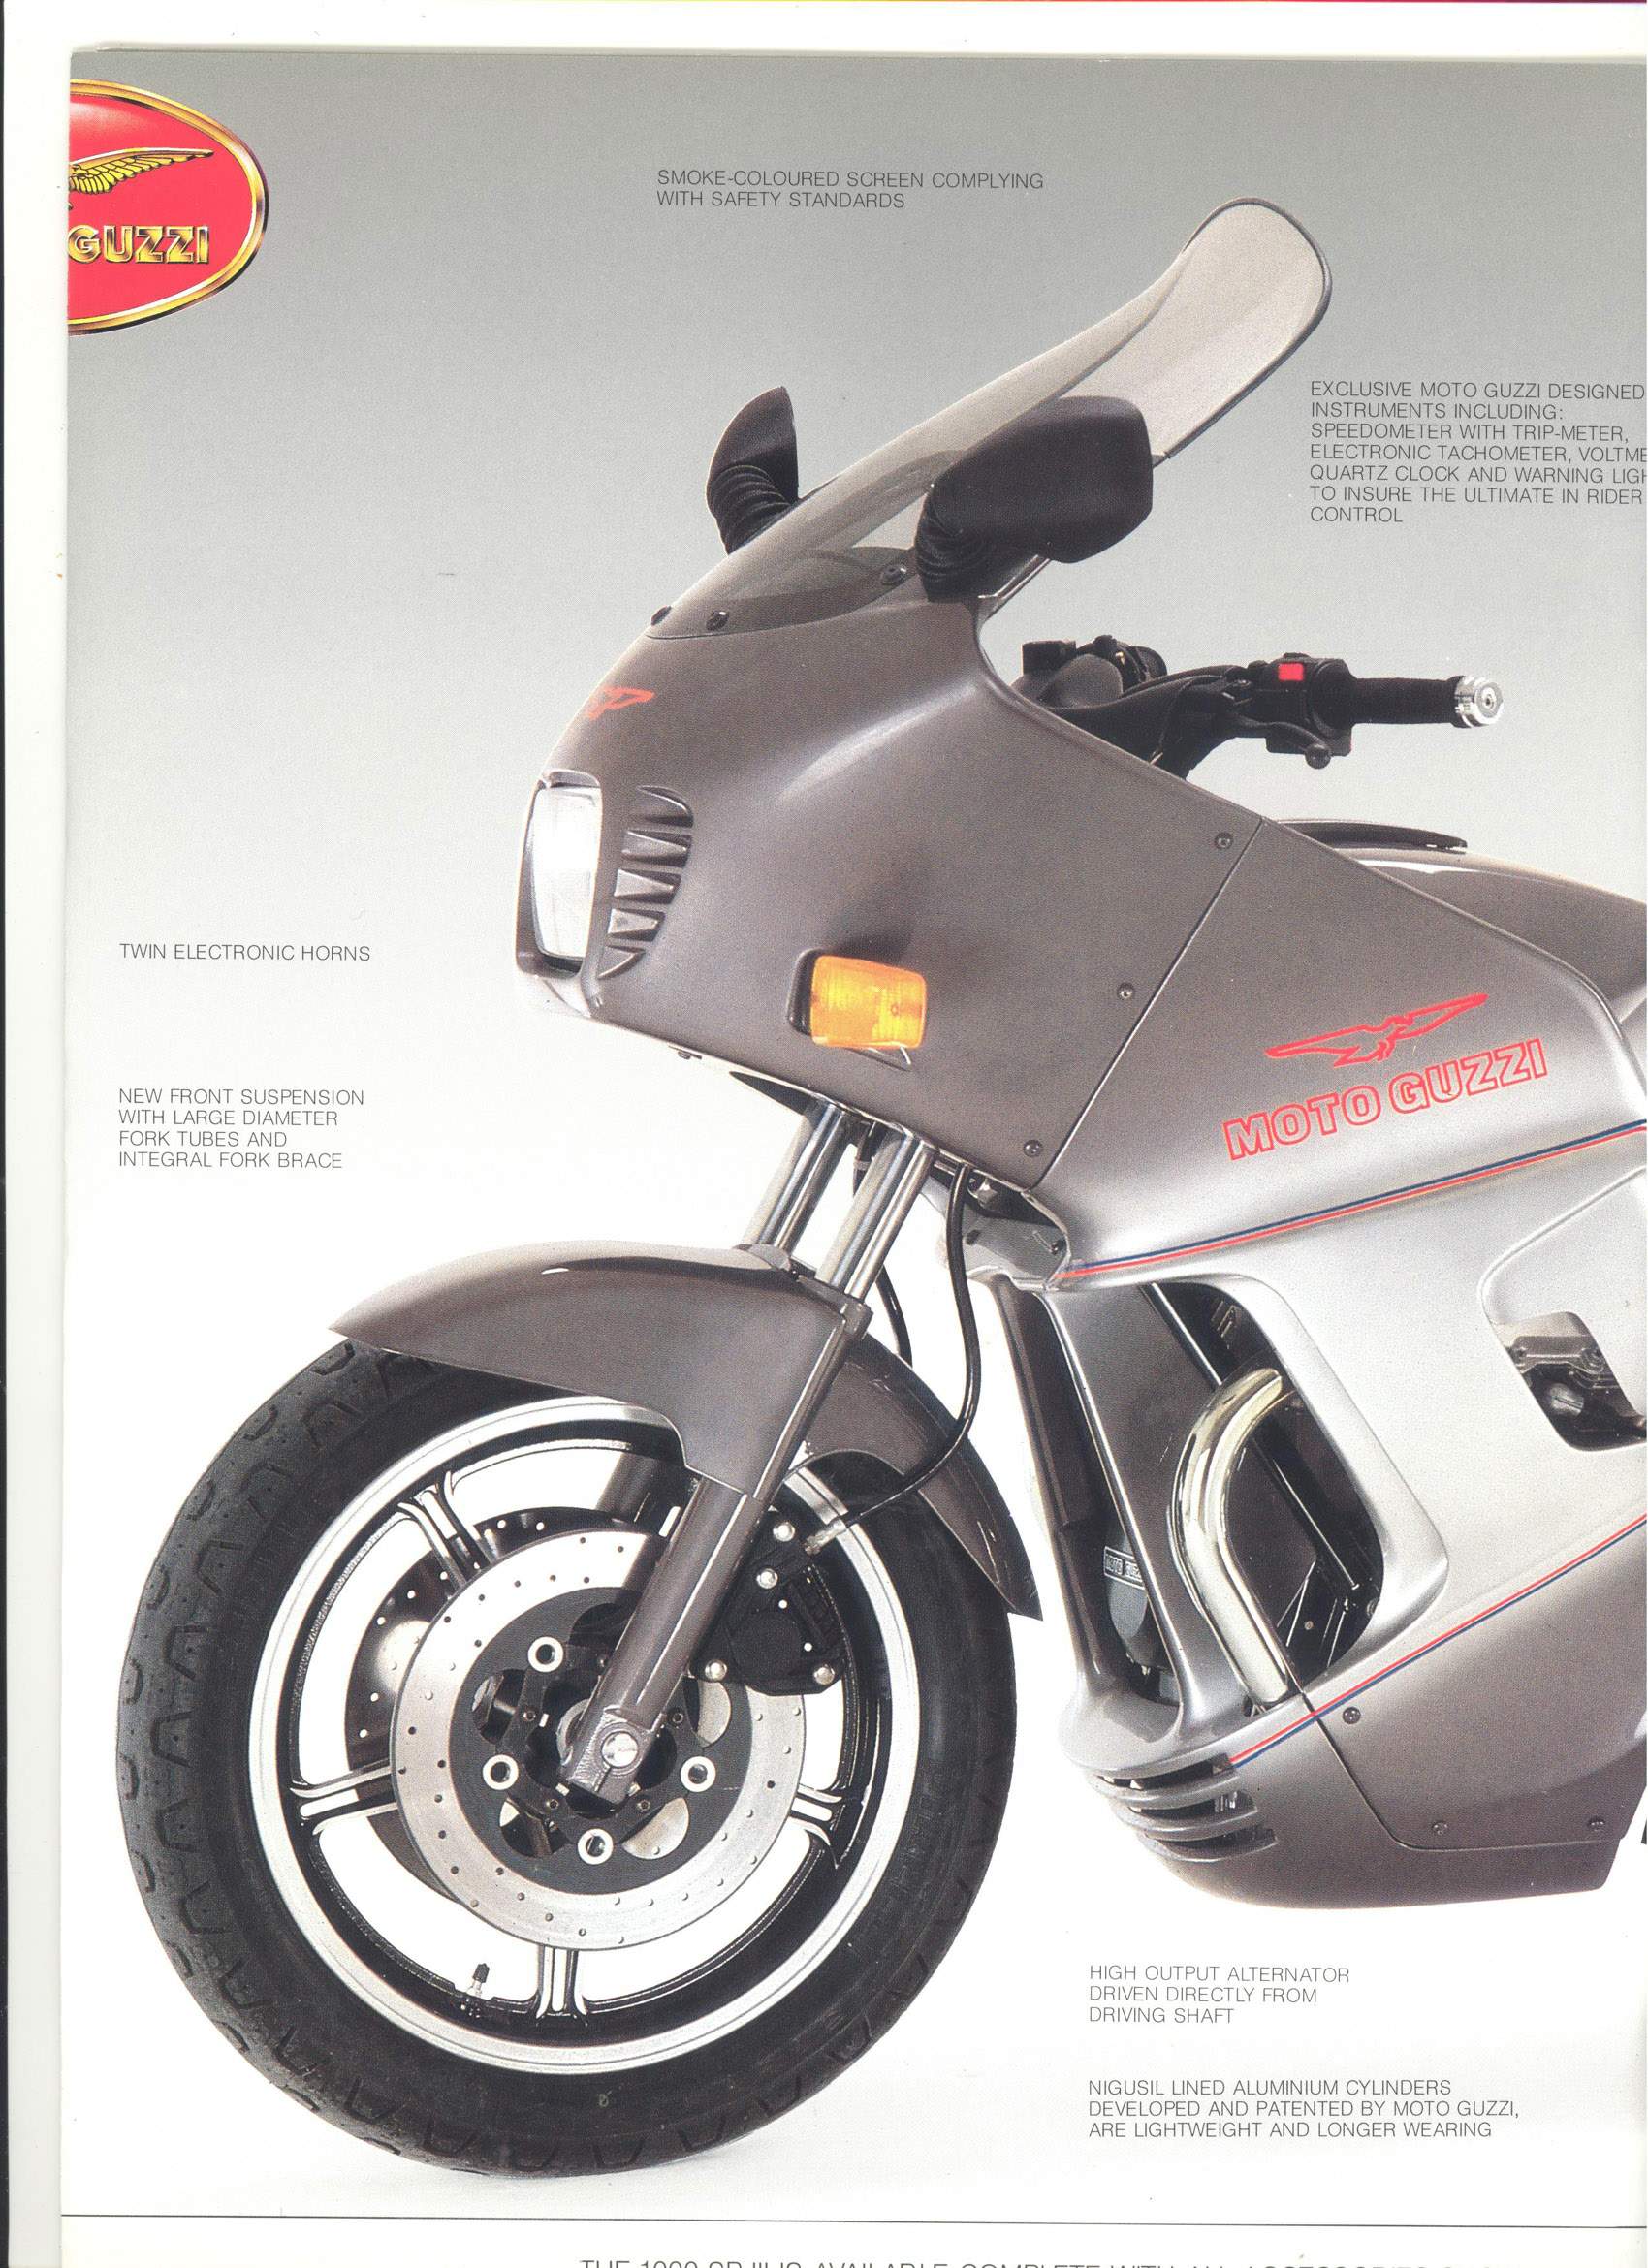 Moto Guzzi 1000SPIII For Sale Specifications, Price and Images